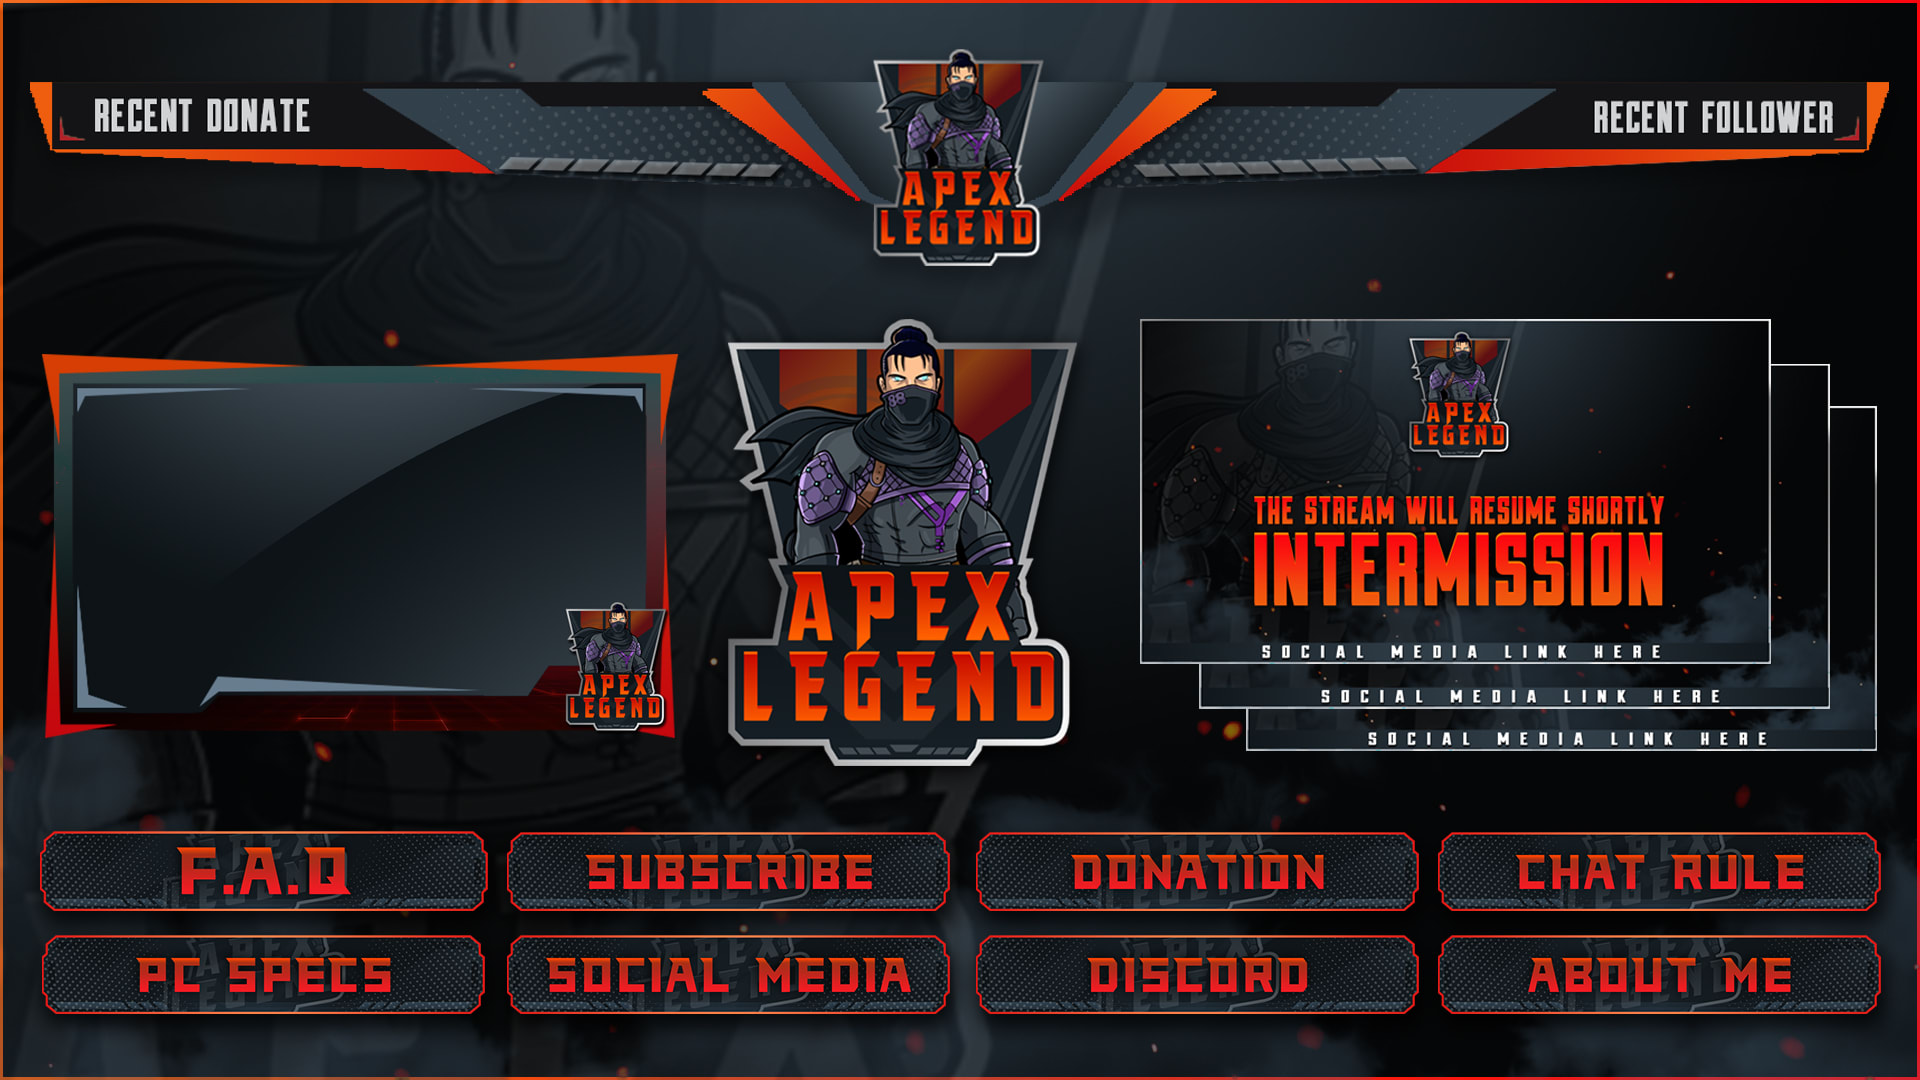 Design Mascot Logo And Esports Twitch Overlay By Spectre Graphic